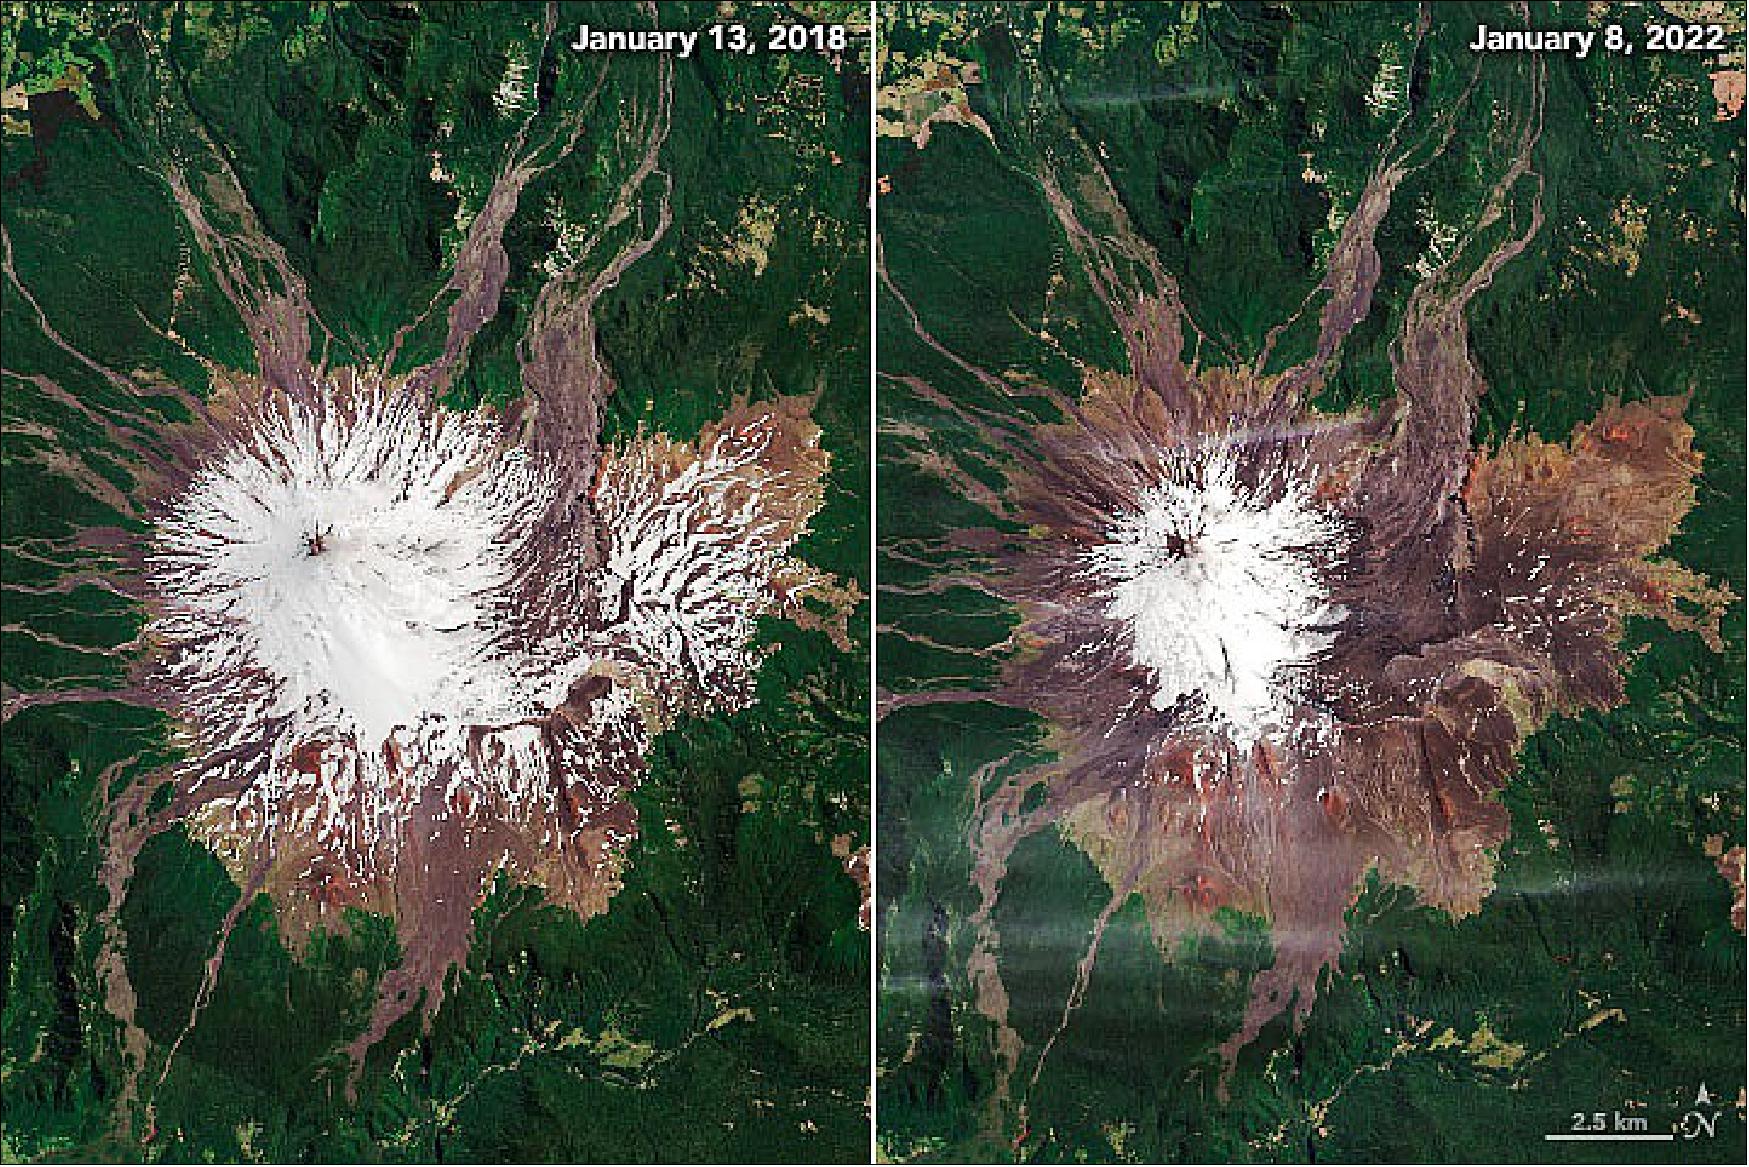 Figure 76: The reduced snow cover is apparent in these images, acquired with the Operational Land Imager (OLI) on Landsat-8 during the southern hemisphere’s summer. Notice that the extent of snow and ice in January 2022 appears much smaller compared to January 2018, which followed a year with more typical amounts of snowfall (image credit: NASA Earth Observatory images by Joshua Stevens, using Landsat data from the U.S. Geological Survey and data from the Level-1 and Atmosphere Archive & Distribution System (LAADS) and Land Atmosphere Near real-time Capability for EOS (LANCE). Story by Kathryn Hansen)